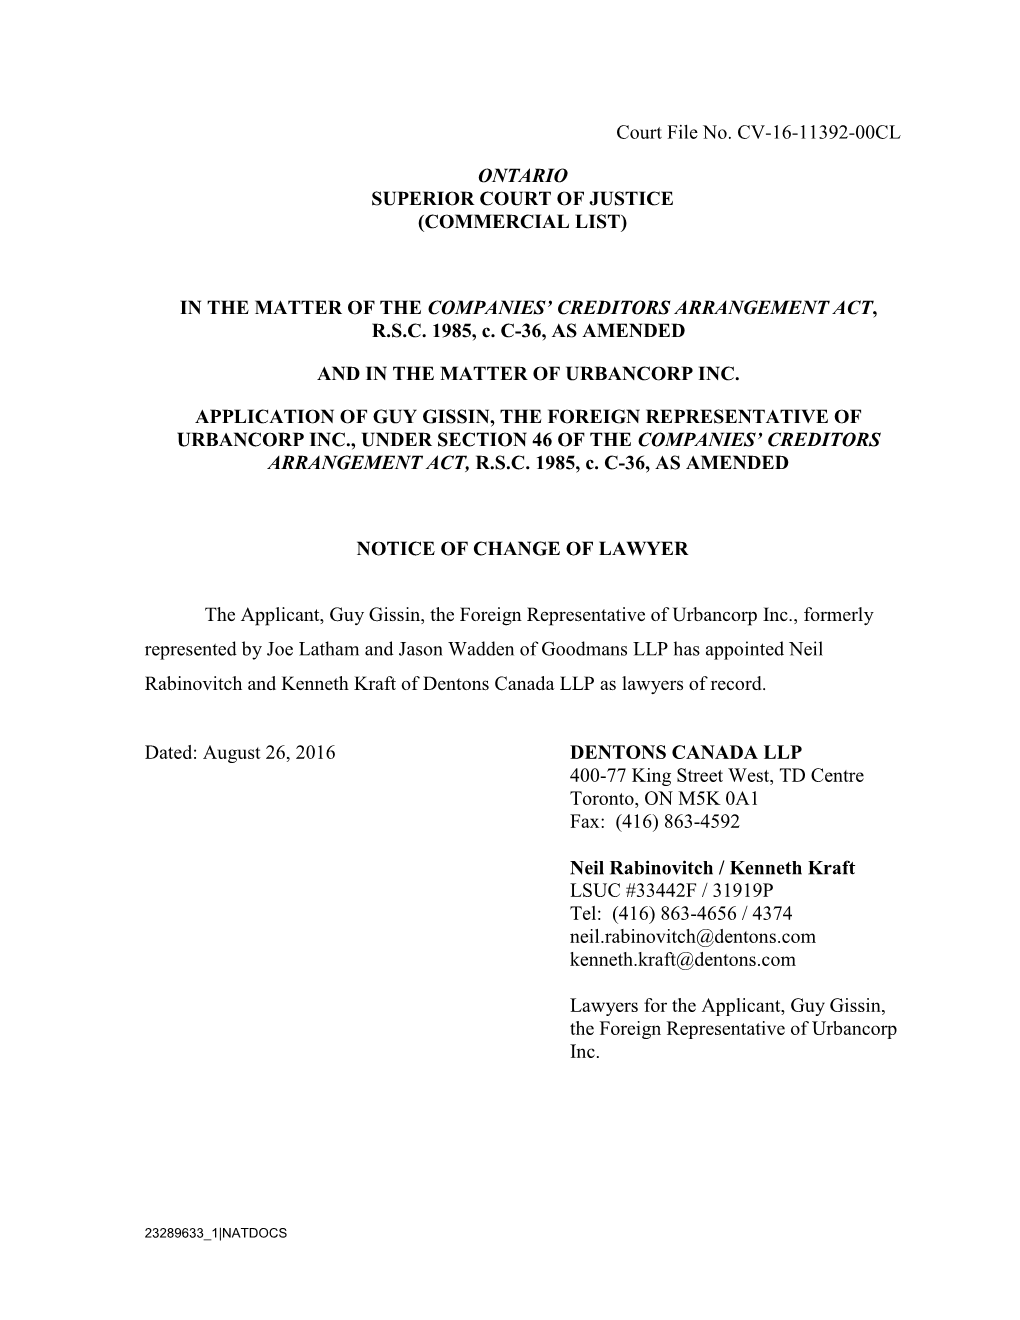 Court File No. CV-16-11392-00CL ONTARIO SUPERIOR COURT of JUSTICE